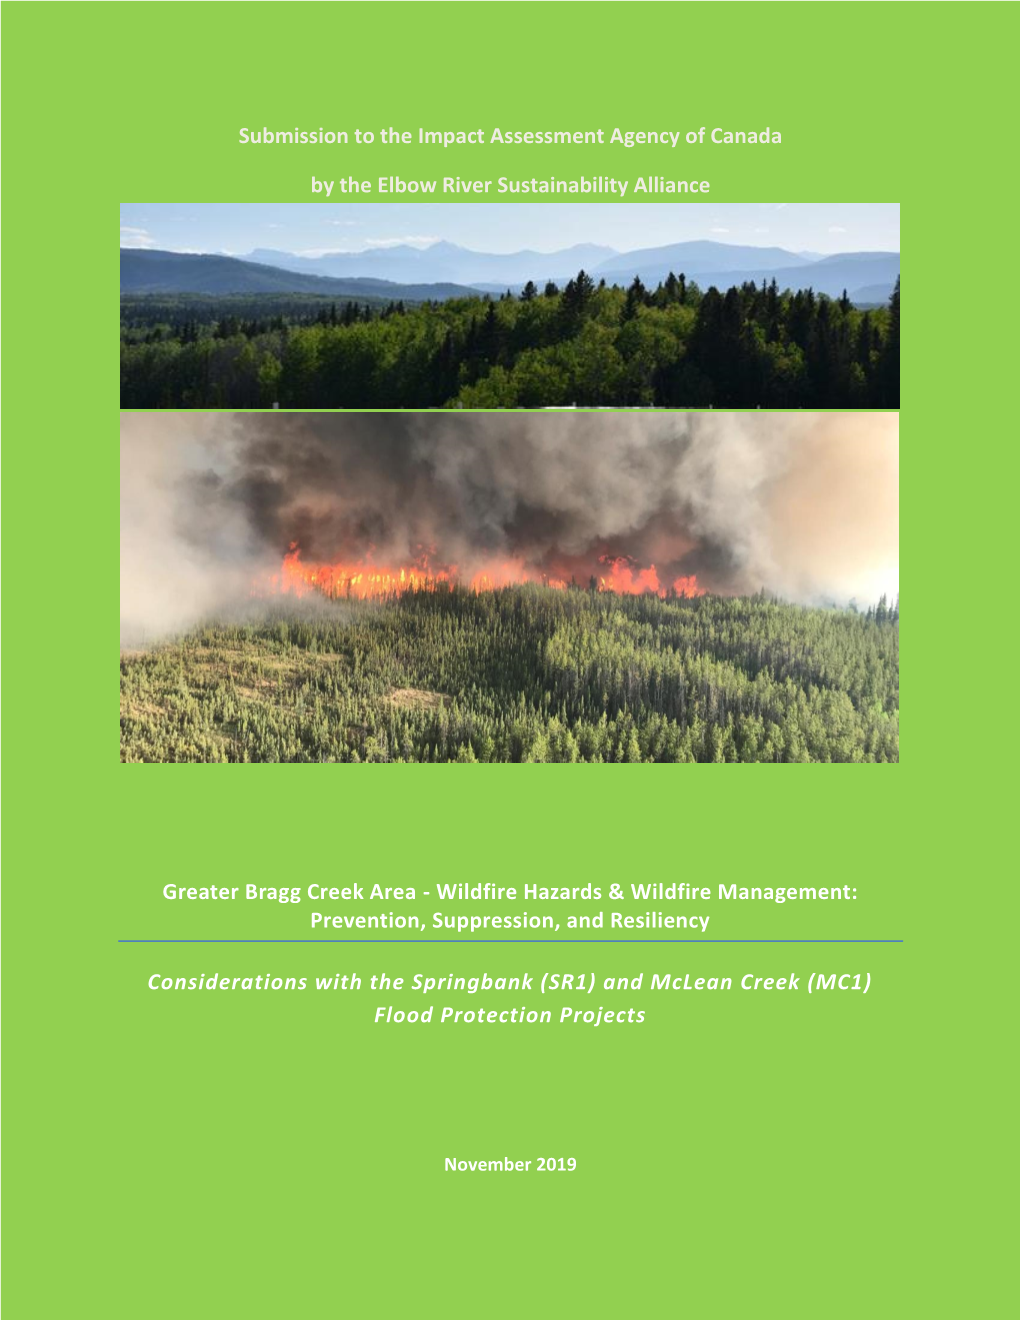 Greater Bragg Creek Area - Wildfire Hazards & Wildfire Management: Prevention, Suppression, and Resiliency